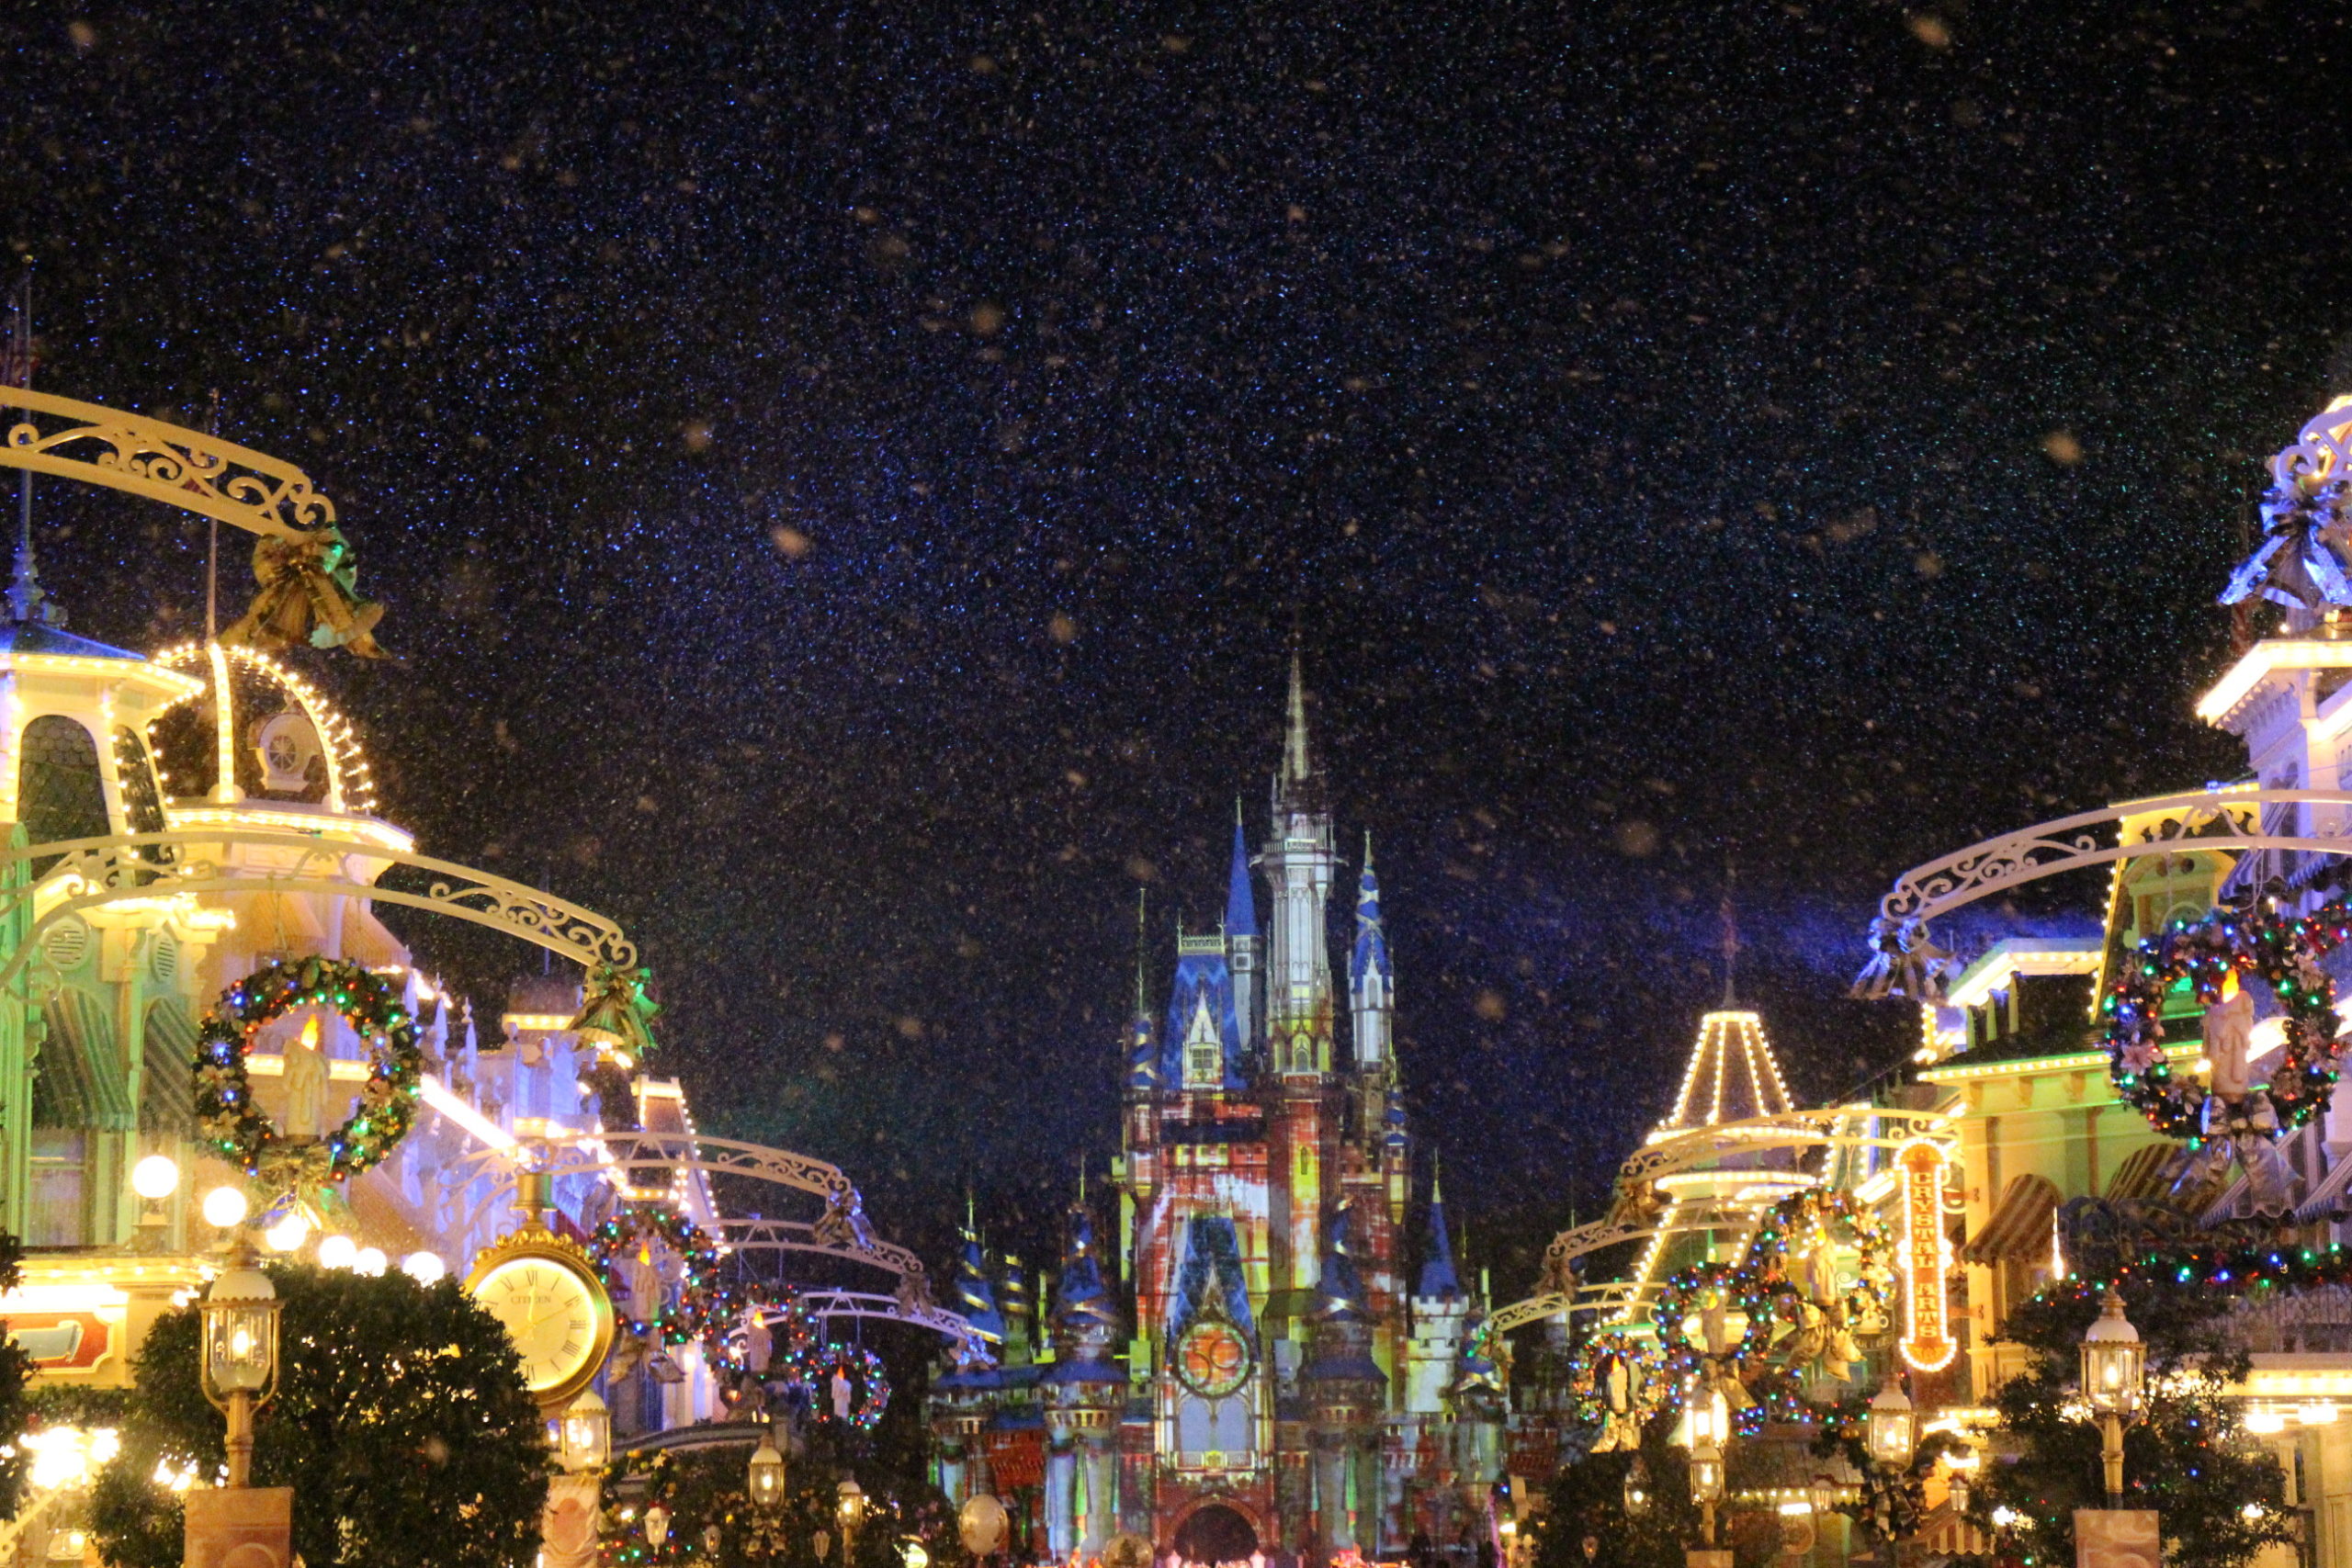 Night time on Main Street USA with snow and Cinderella Castle